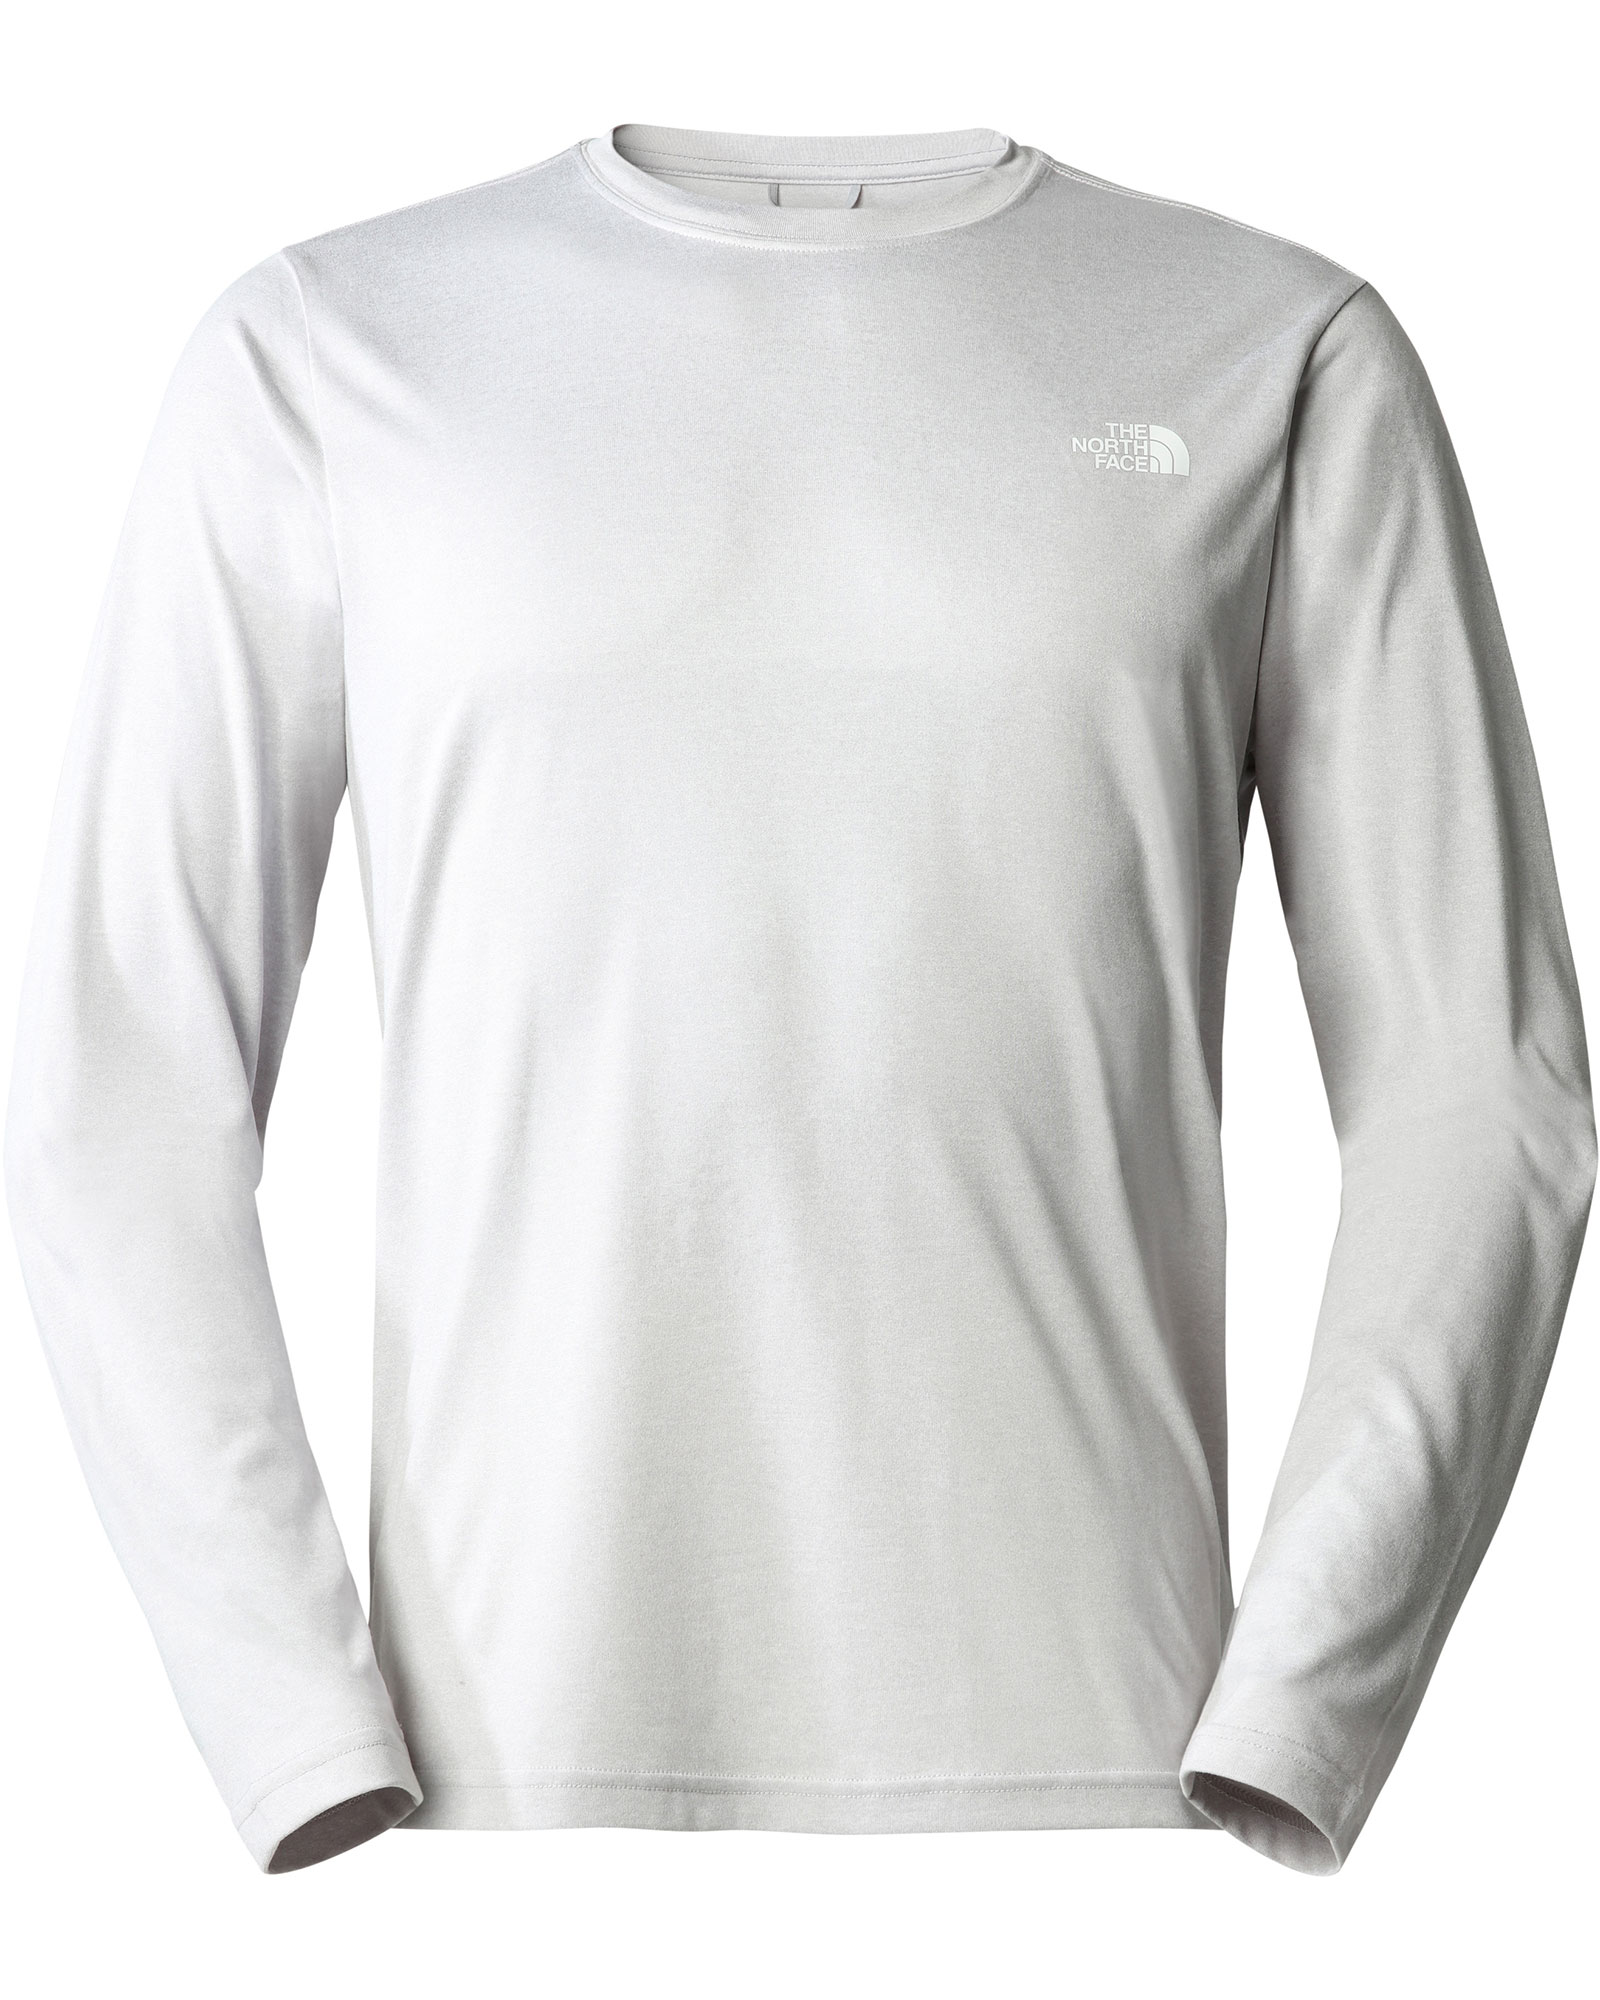 The North Face Men’s Reaxion Amp Long Sleeved Crew T Shirt - TNF Light Grey Heather M